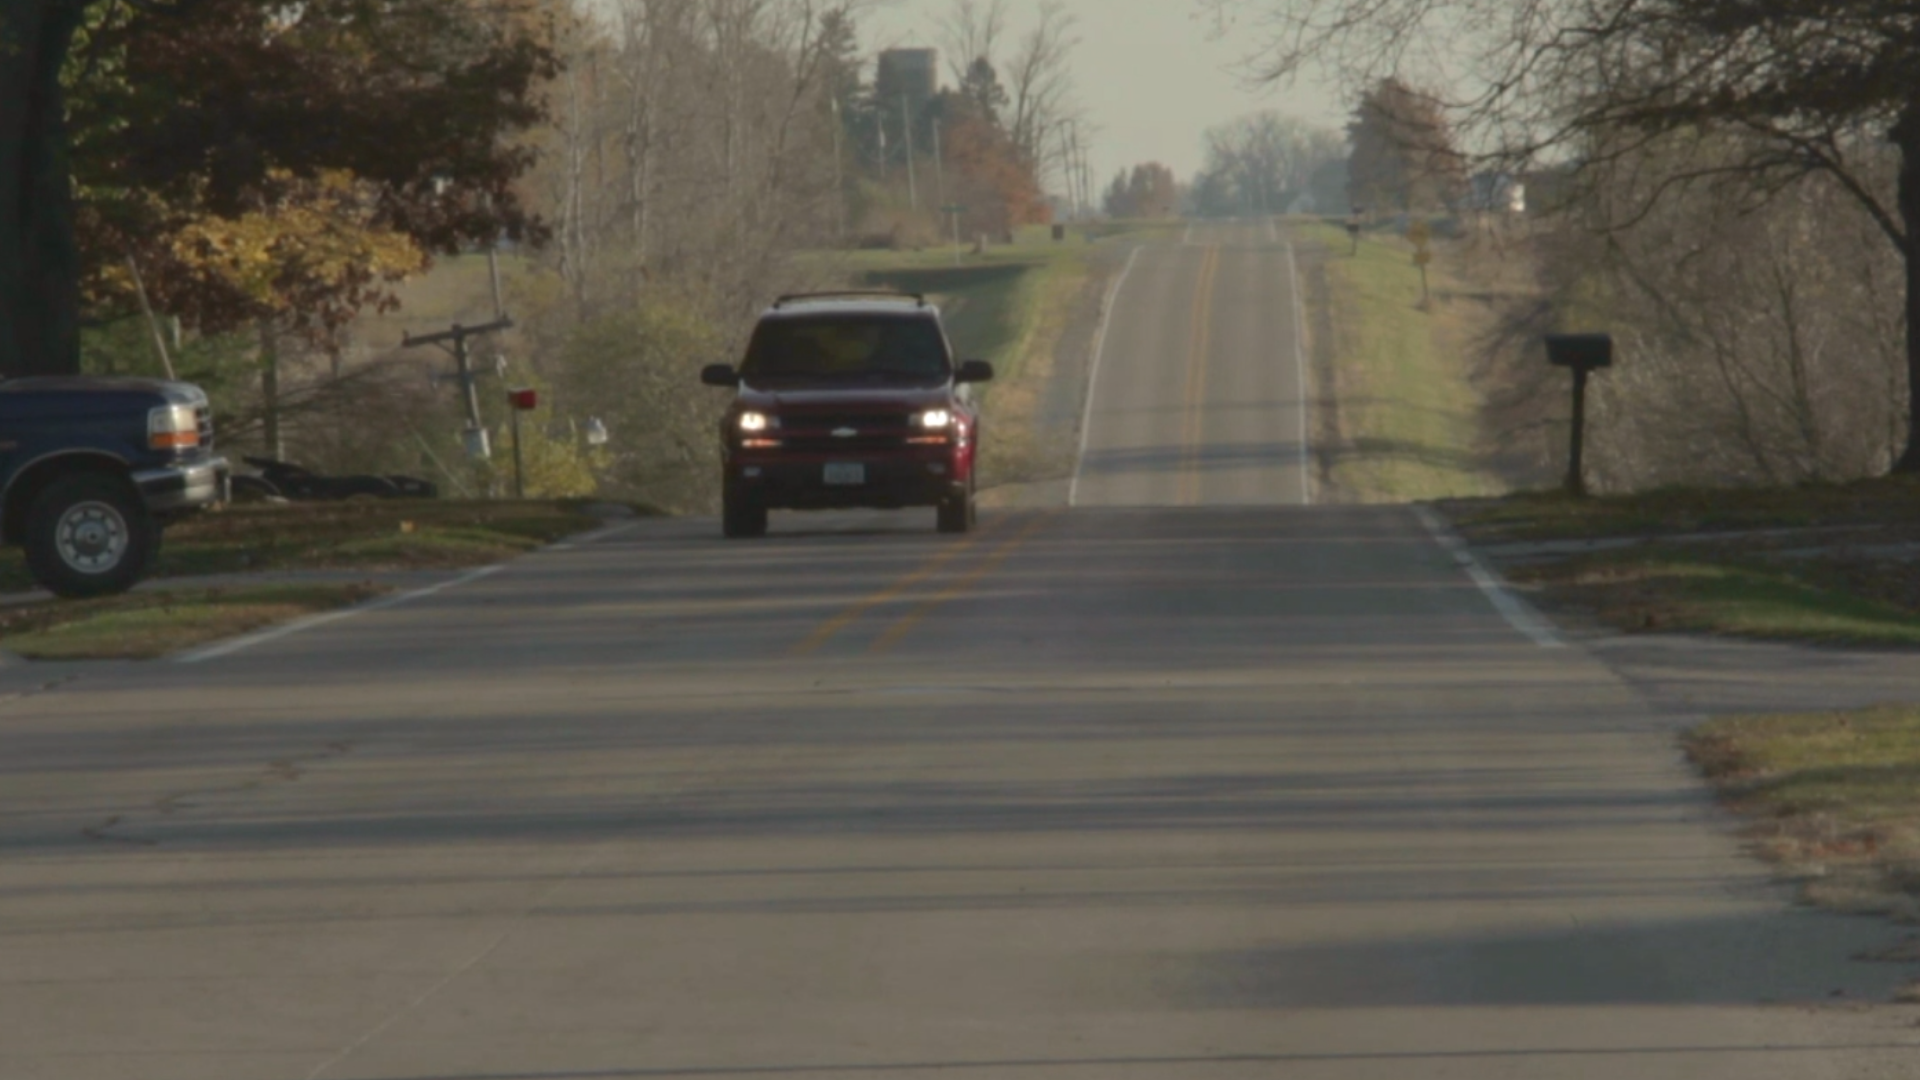 The risk of dying in a crash was 62% higher on a rural road compared to an urban road for the same trip length.